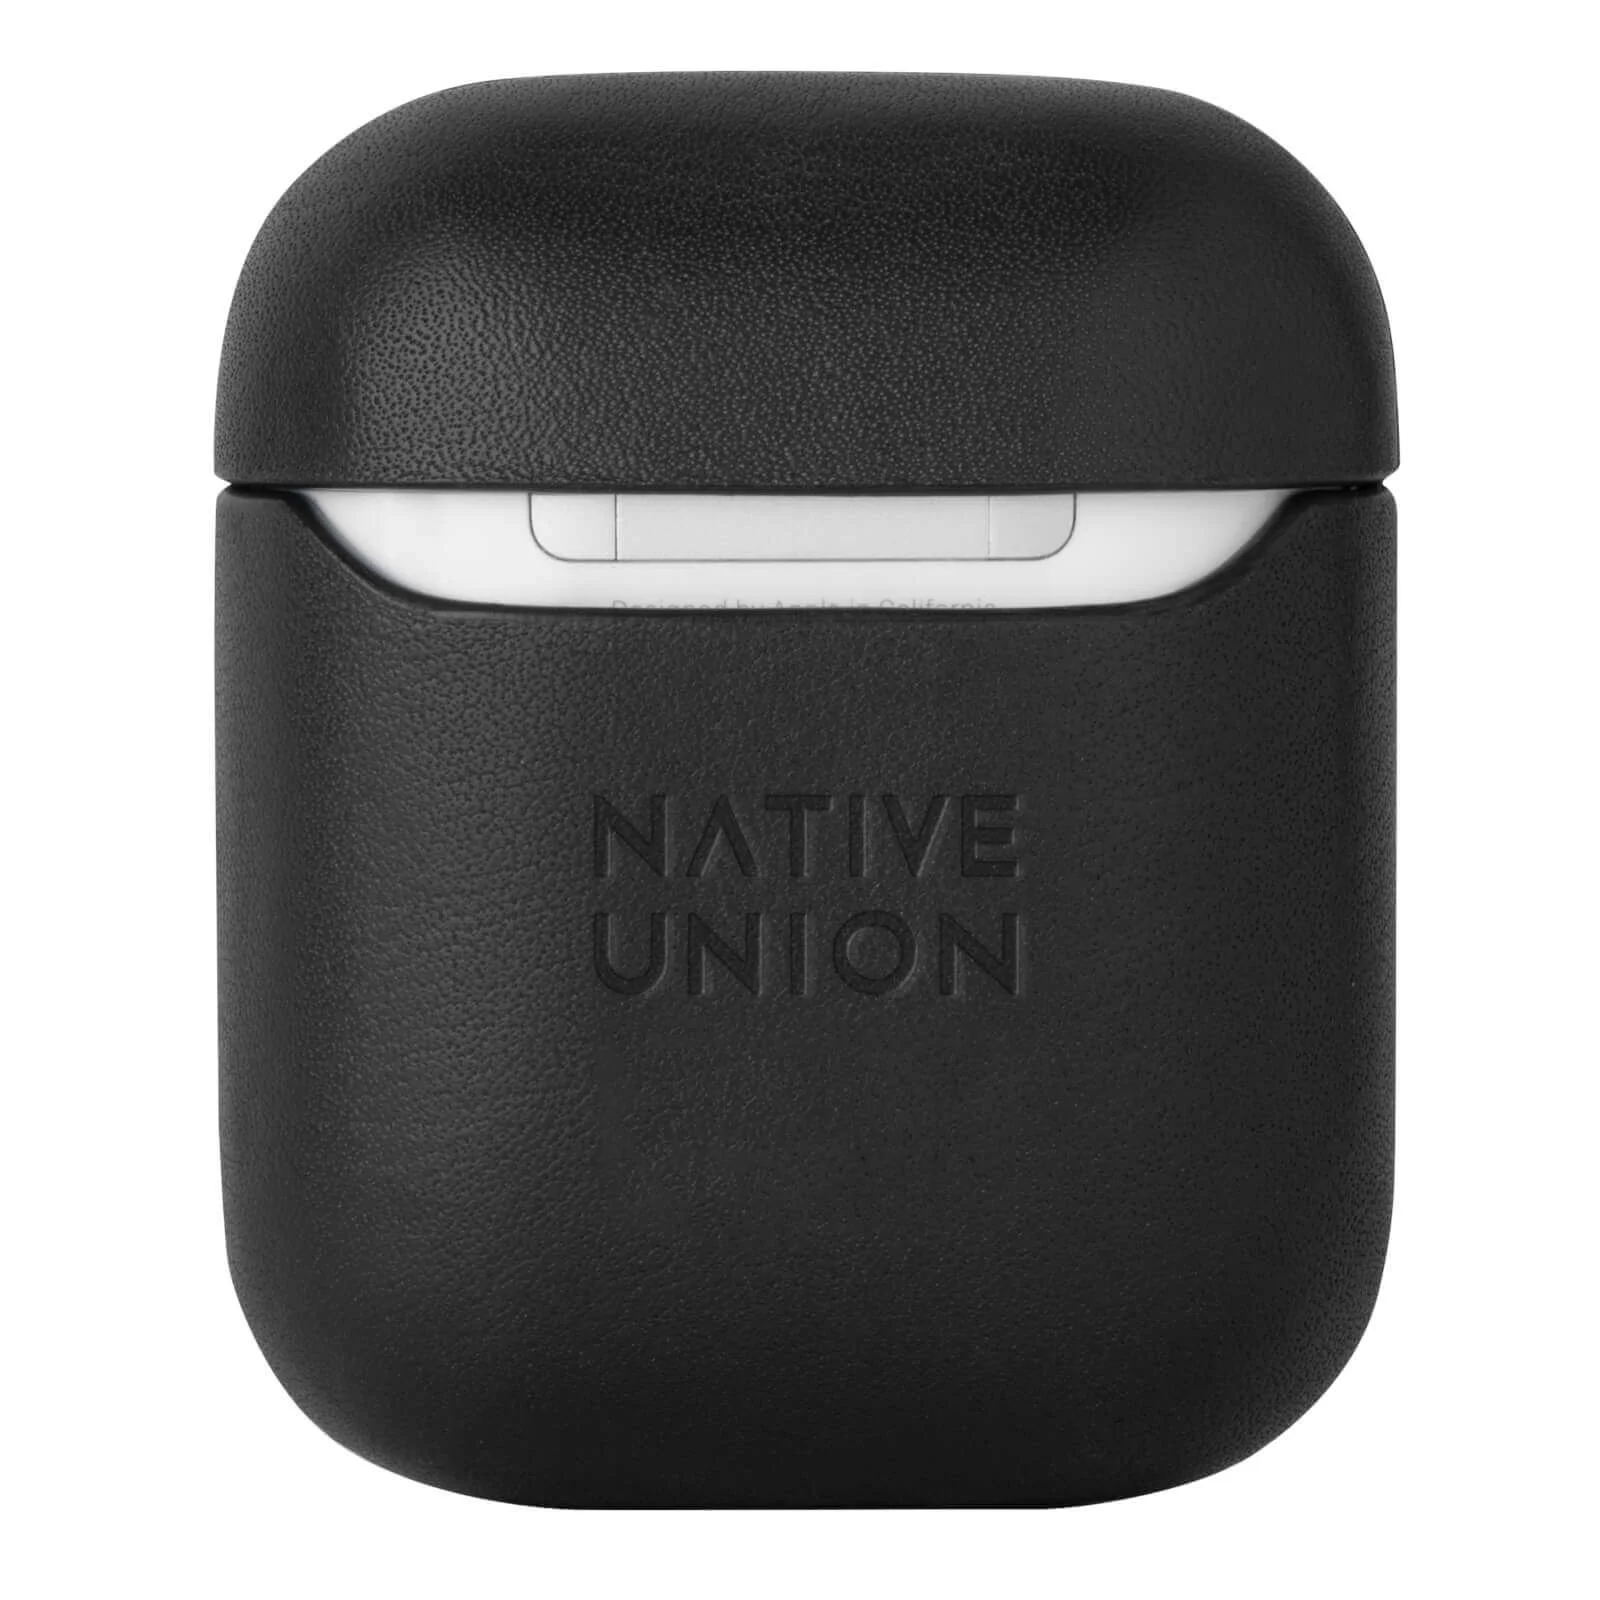 Native Union Classic Leather Airpods Case - Black Image 1